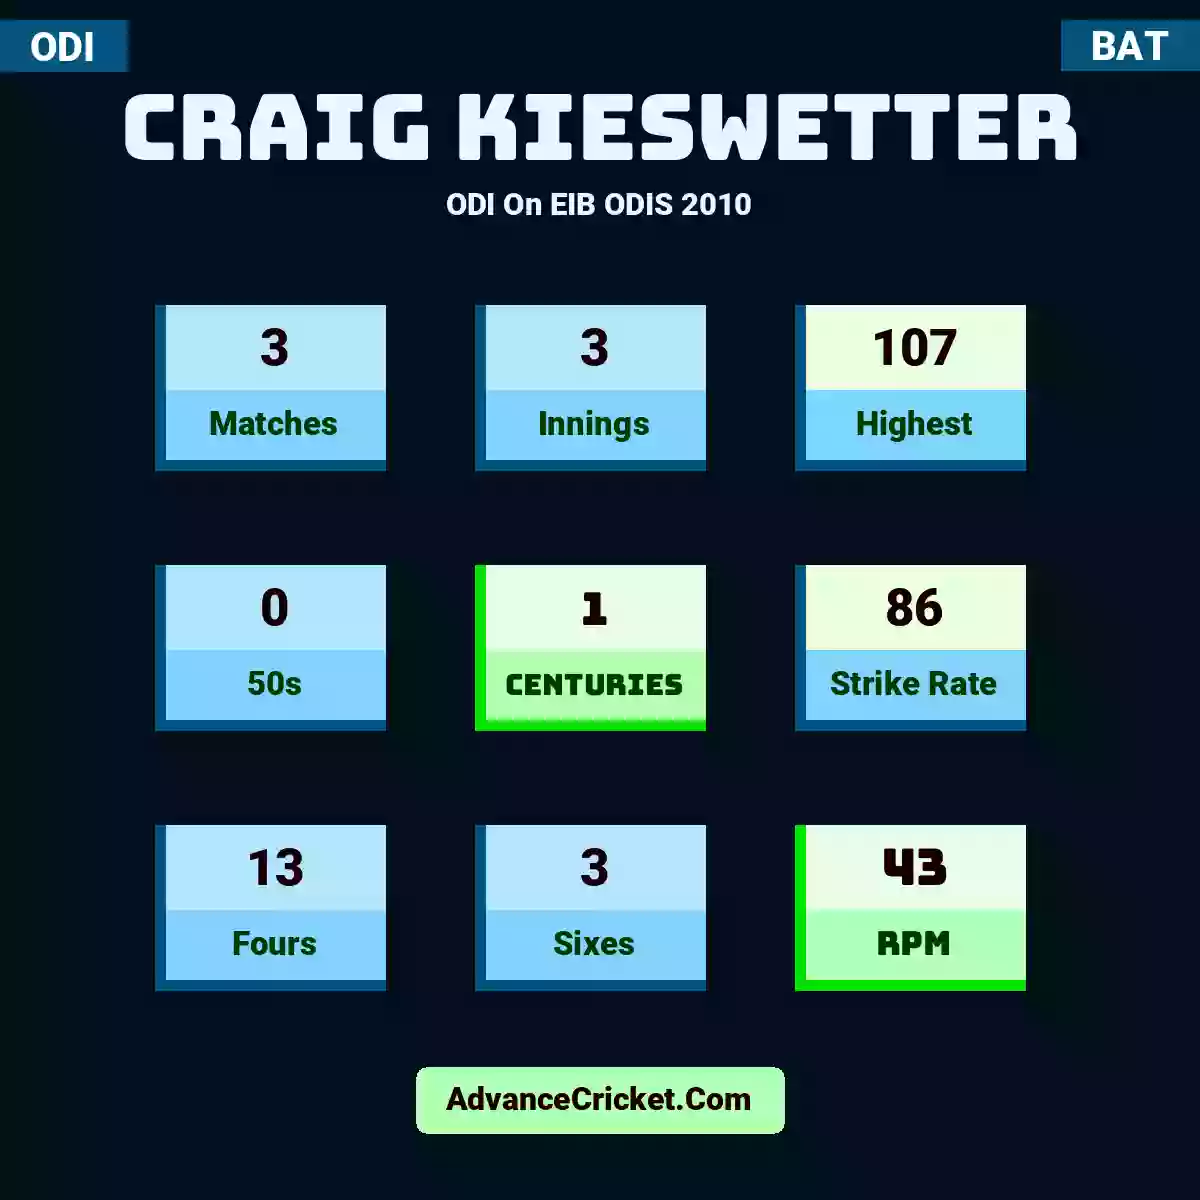 Craig Kieswetter ODI  On EIB ODIS 2010, Craig Kieswetter played 3 matches, scored 107 runs as highest, 0 half-centuries, and 1 centuries, with a strike rate of 86. C.Kieswetter hit 13 fours and 3 sixes, with an RPM of 43.